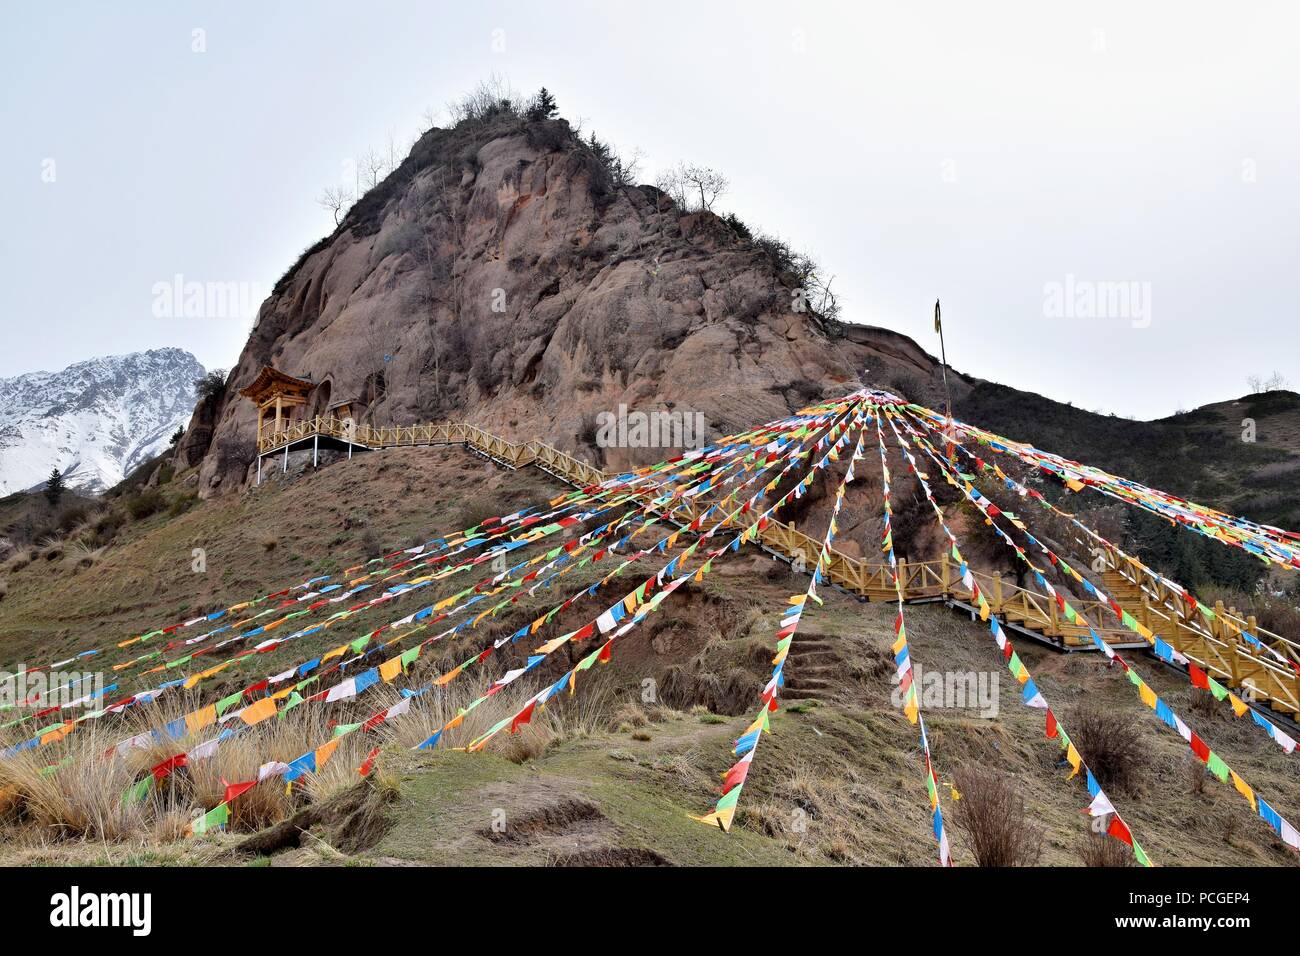 Mati Temple in Gansu province in China and the prayer flags fluttering in the foreground. Stock Photo